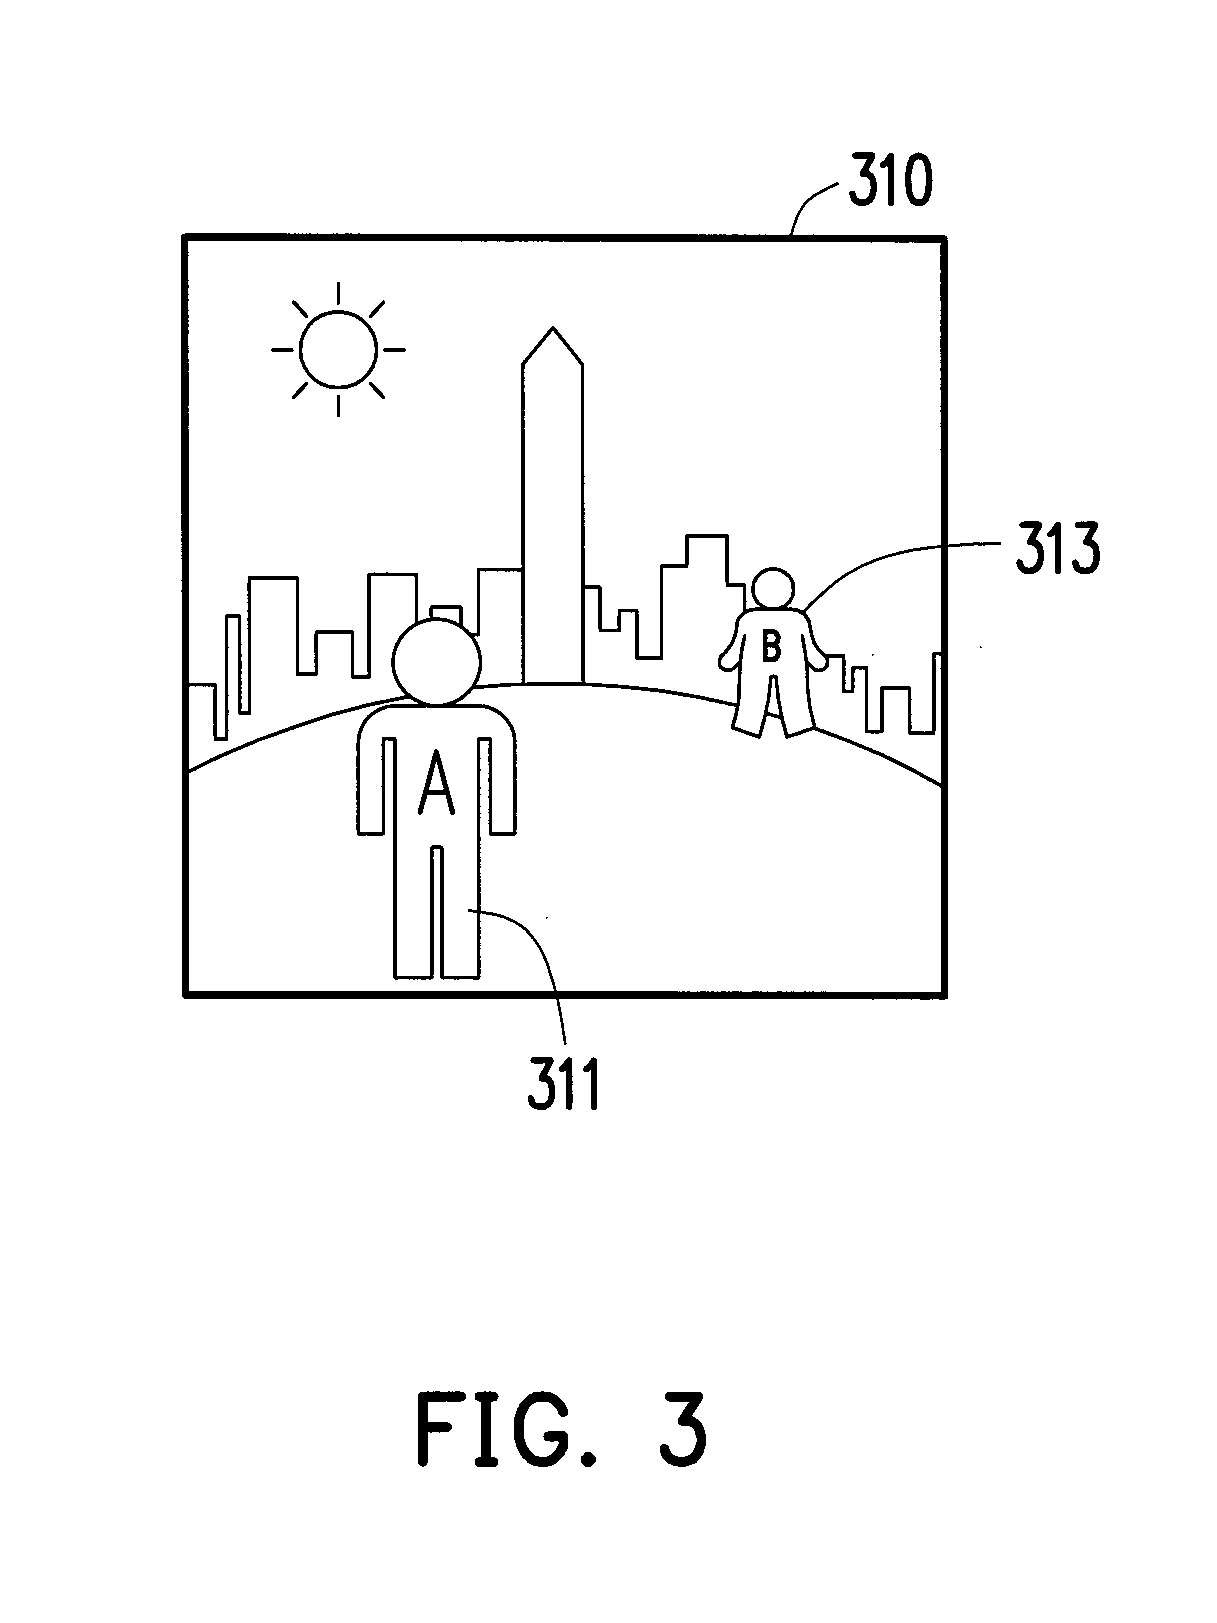 Method for searching relevant images via active learning, electronic device using the same